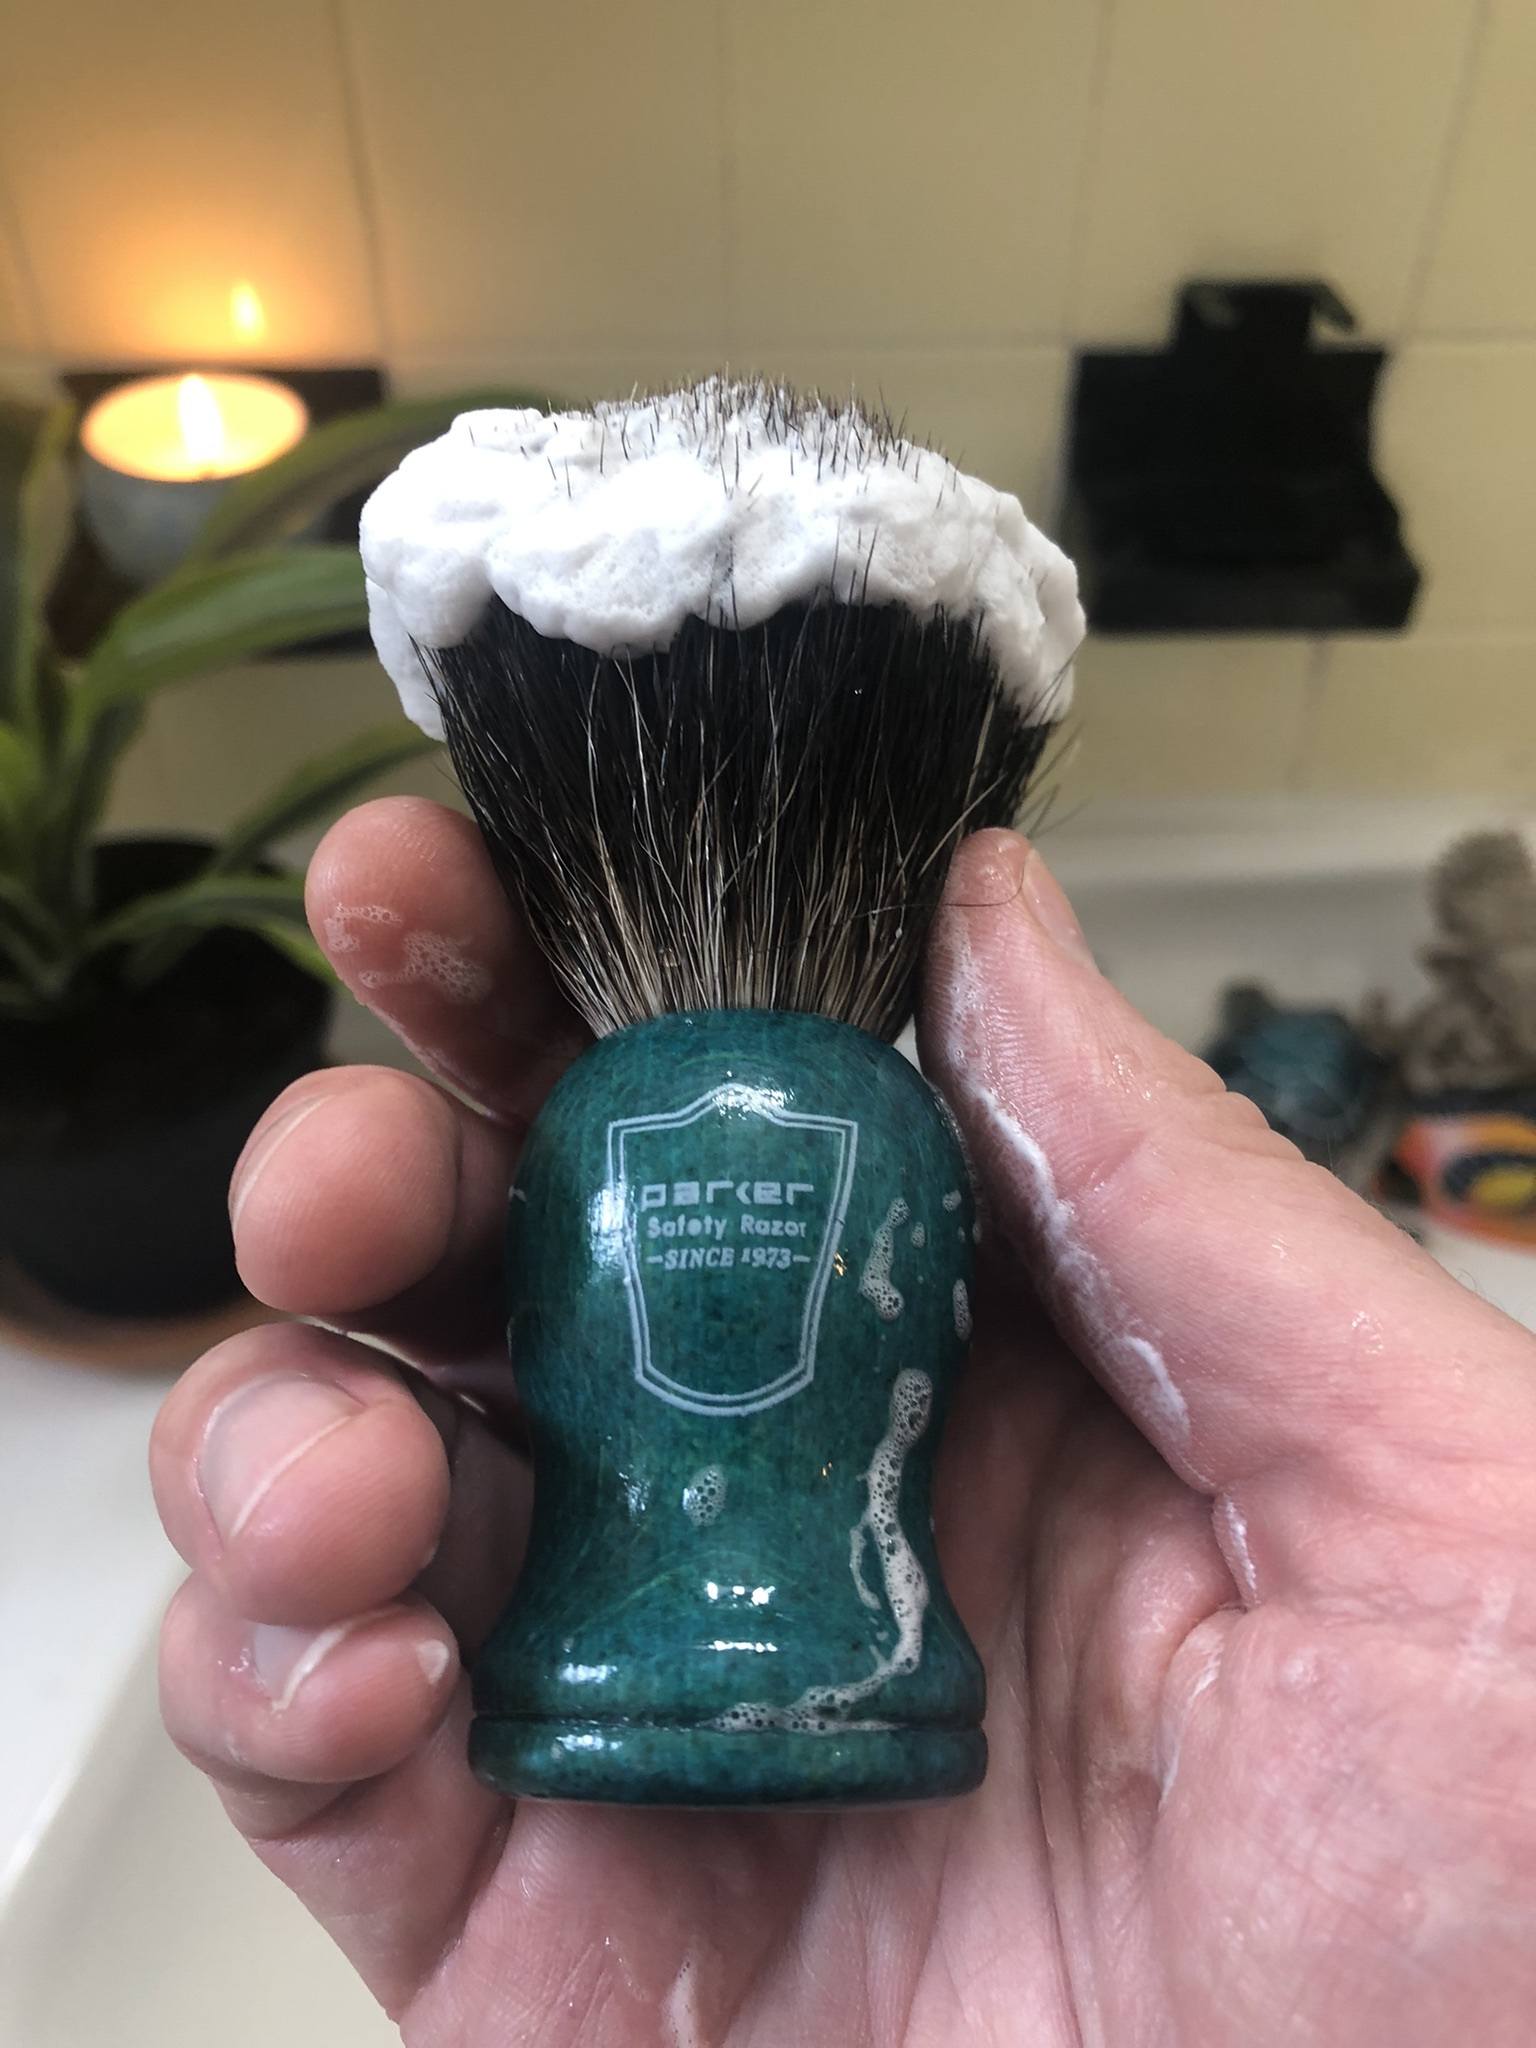 Taconic Shaving Soap Review - How it Is on Your Shaving Brush